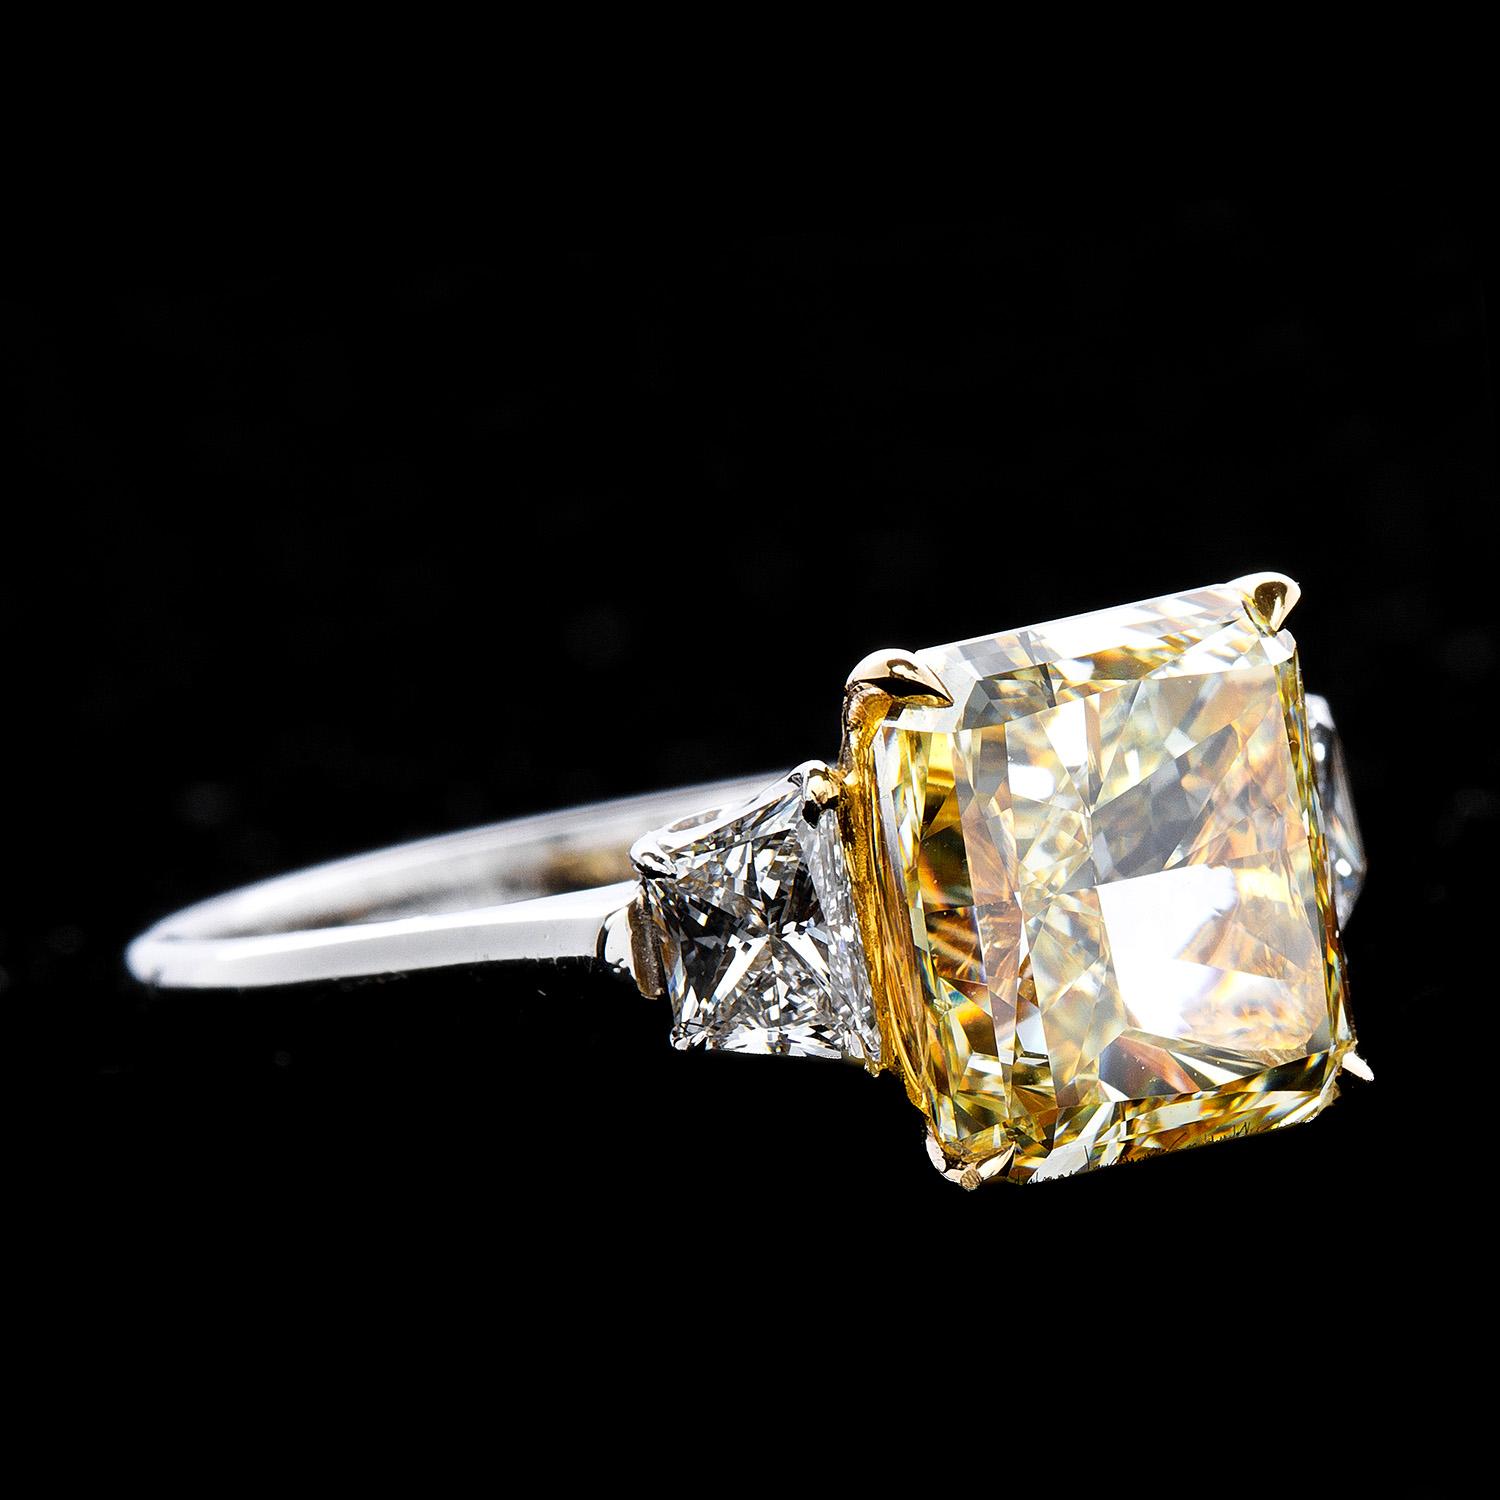 GIA Certified 3.52 Carat Yellow Radiant Cut Diamond For Sale 3